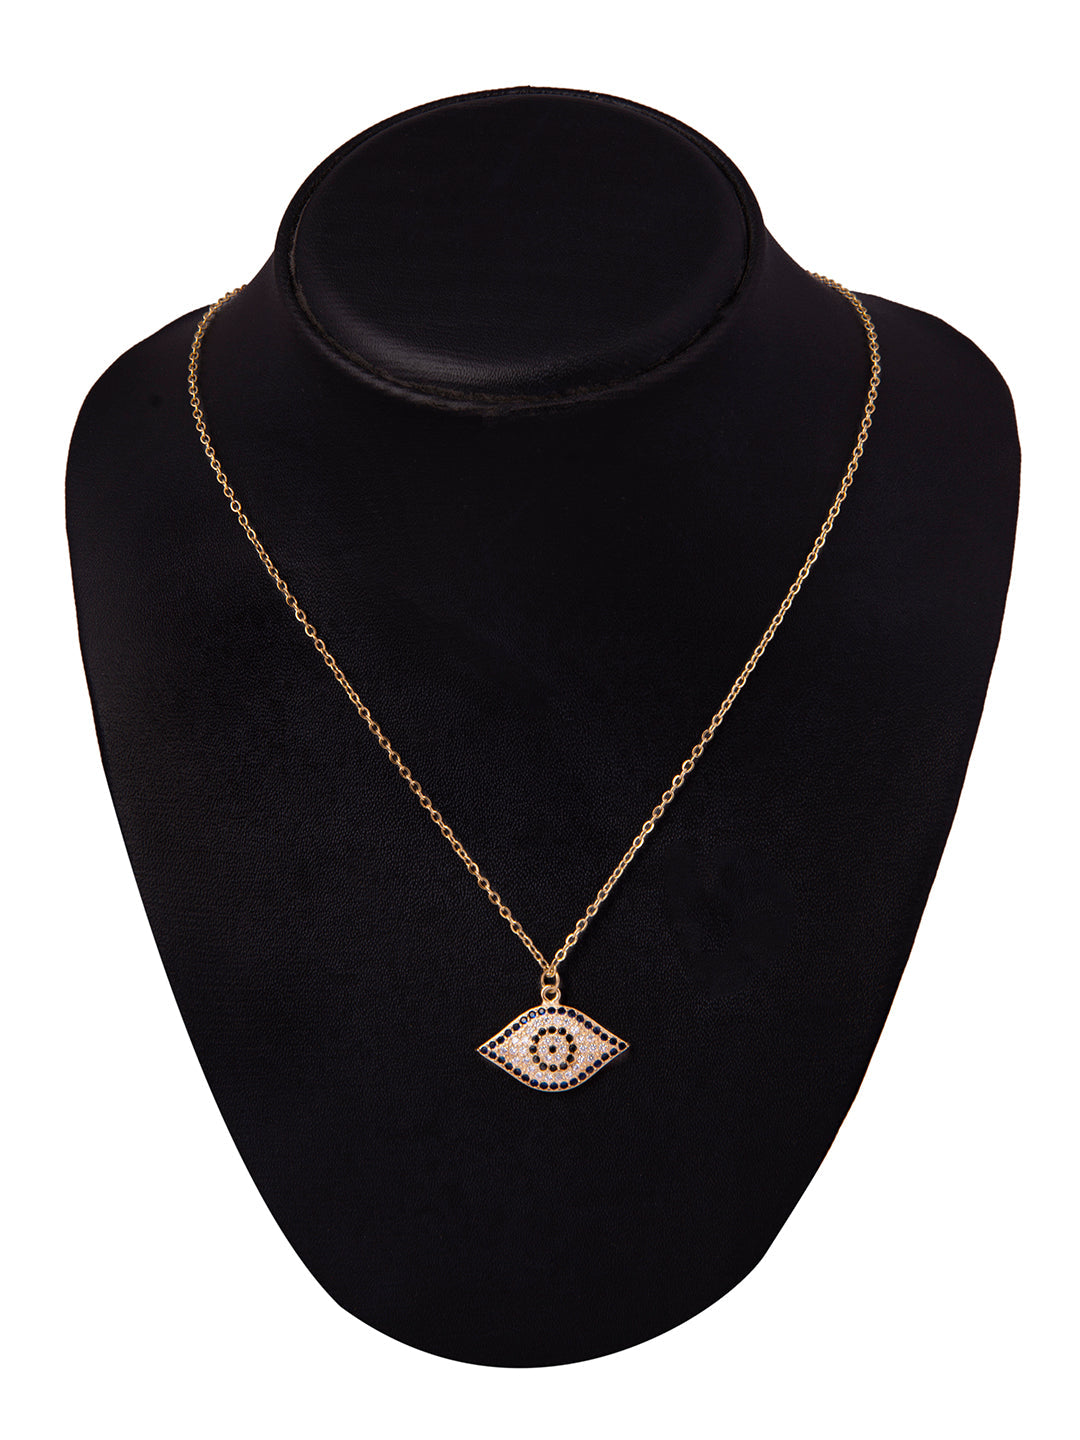 Gold Plated CZ Studded American Diamond Evil Eye Necklace For Girls, Teens & Women (MD_2101)